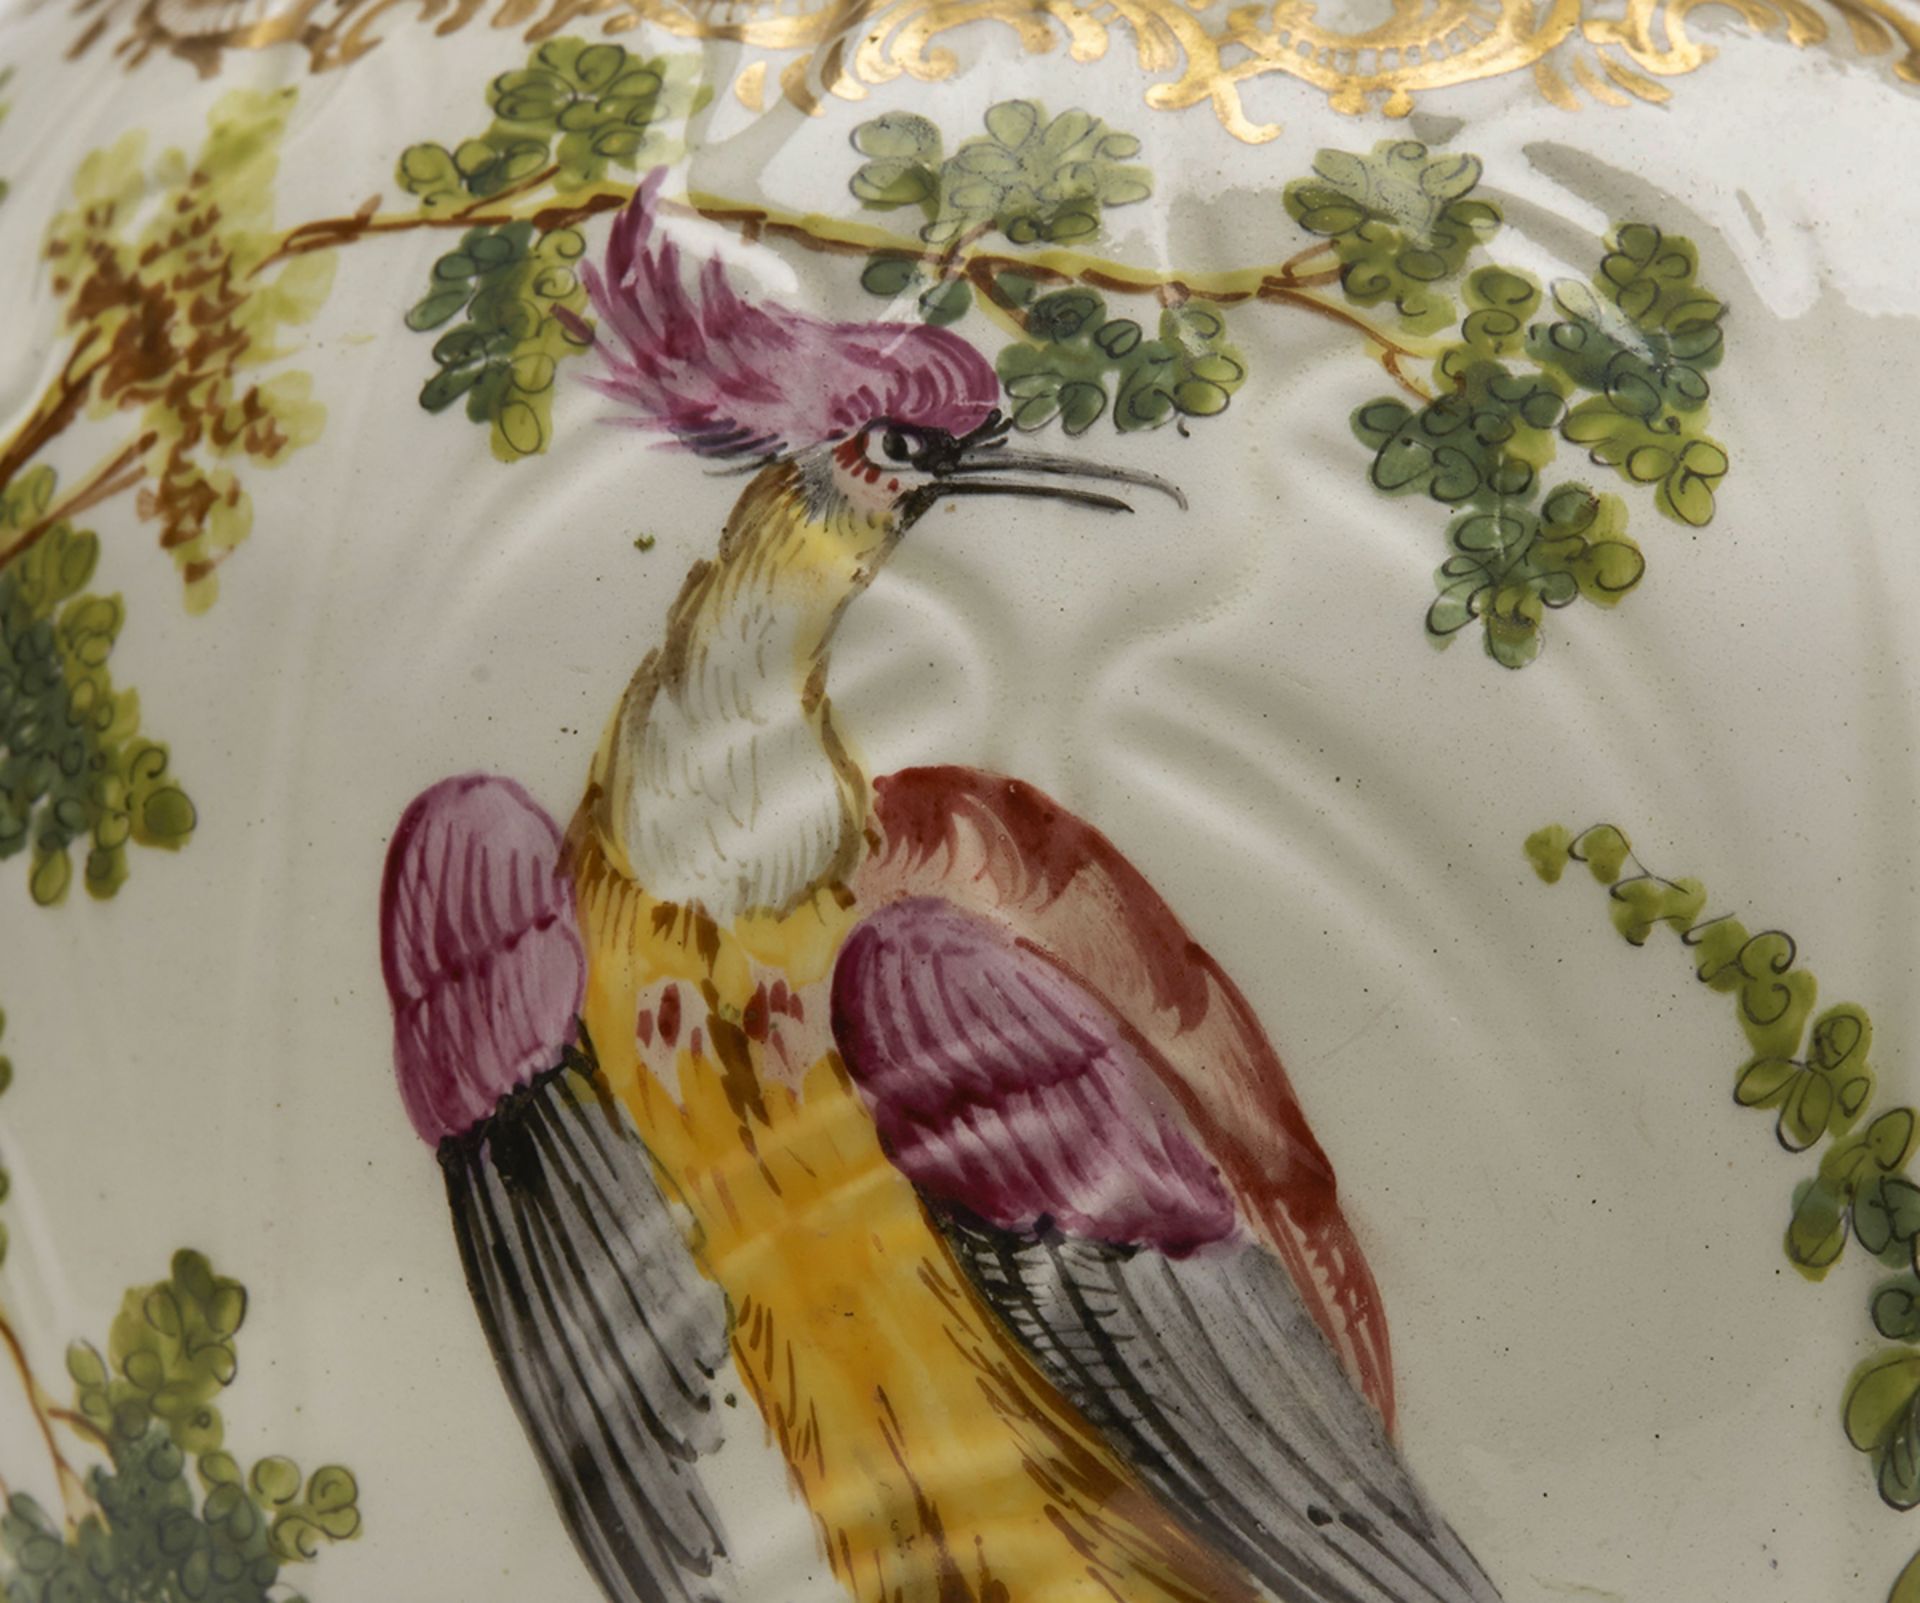 ANTIQUE CABBAGE LEAF MASK JUG WITH EXOTIC BIRDS 18/19TH C. - Image 5 of 9